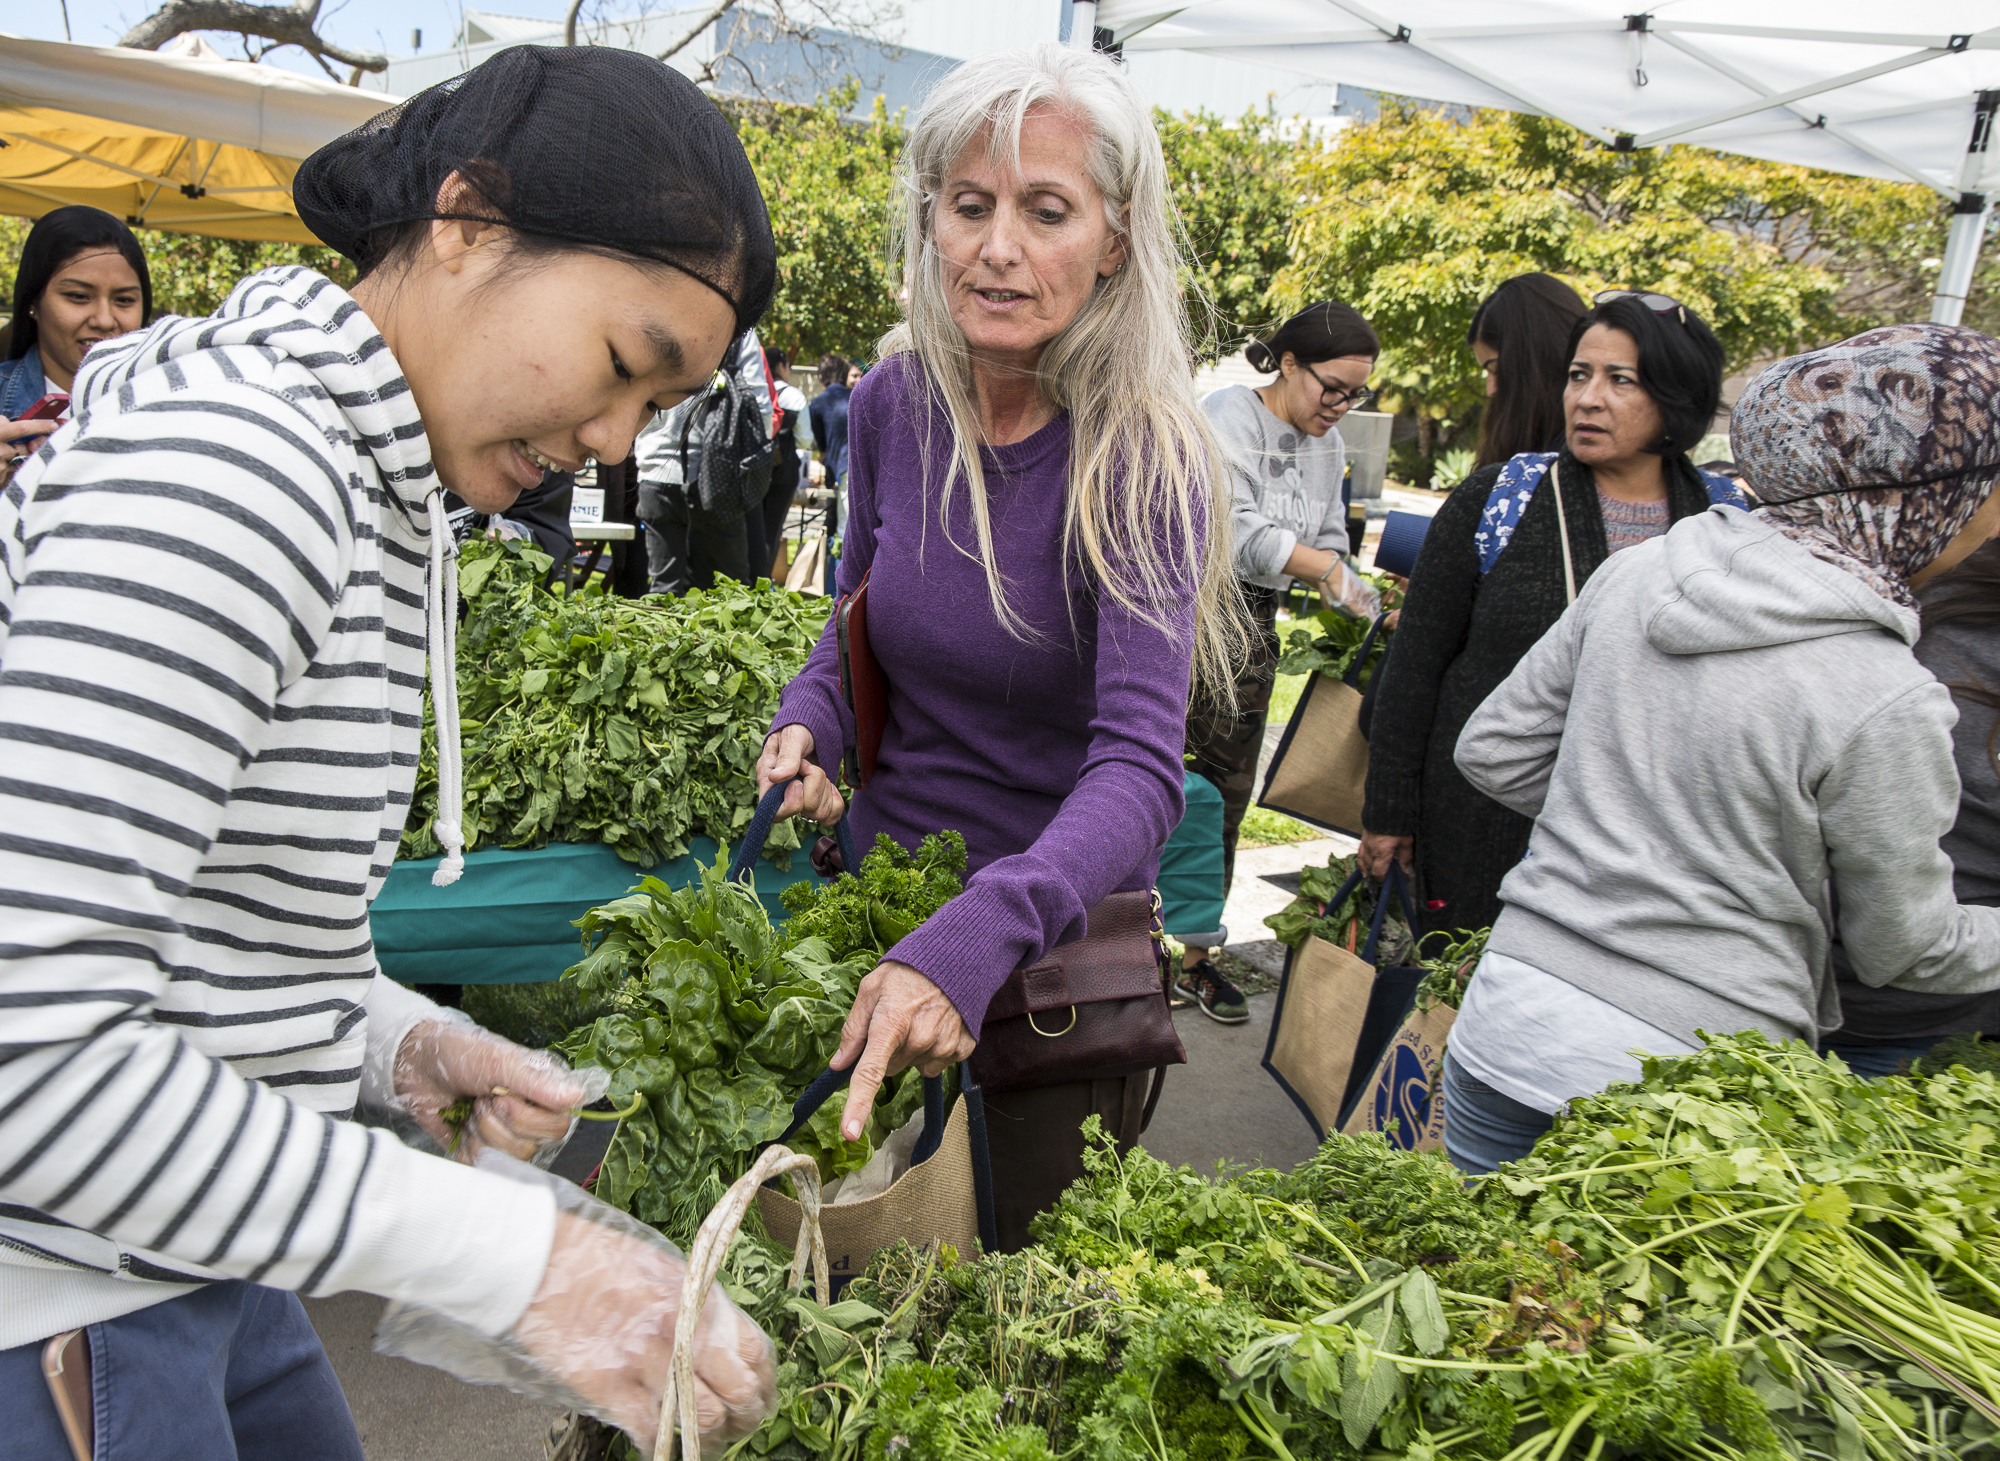  Santa Monica College (SMC) student Laura Jayne Blackwell (center) stops and points to the fresh cilantro that she would love to add to her basket of fresh produce during the Santa Monica College Earth Day event “Students Feeding Students” from the C